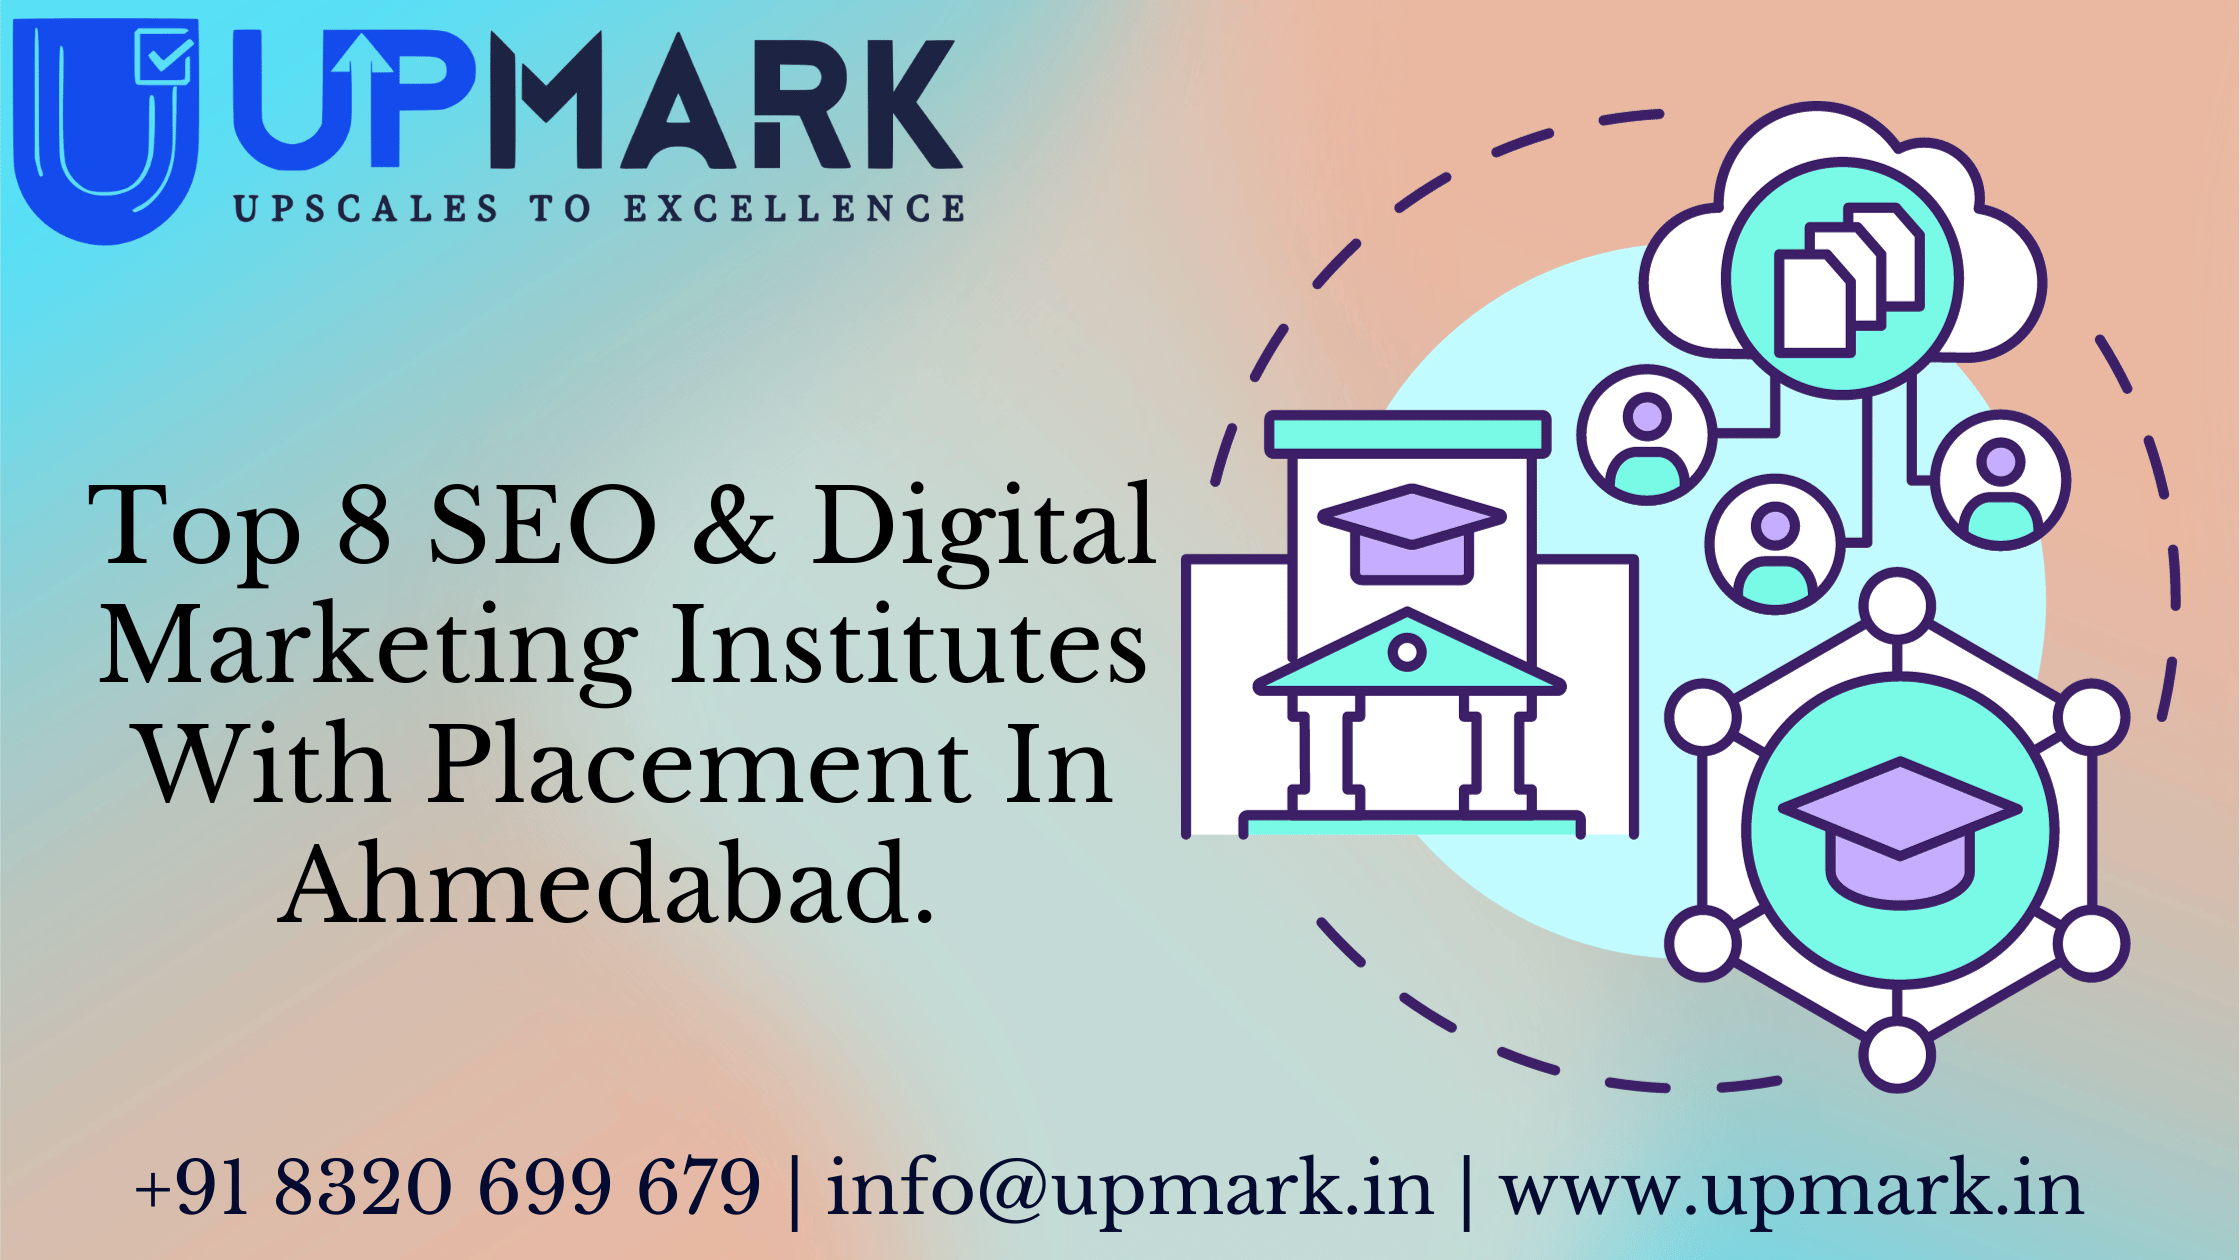 Top 8 SEO & Digital Marketing Institutes With Placement In Ahmedabad.